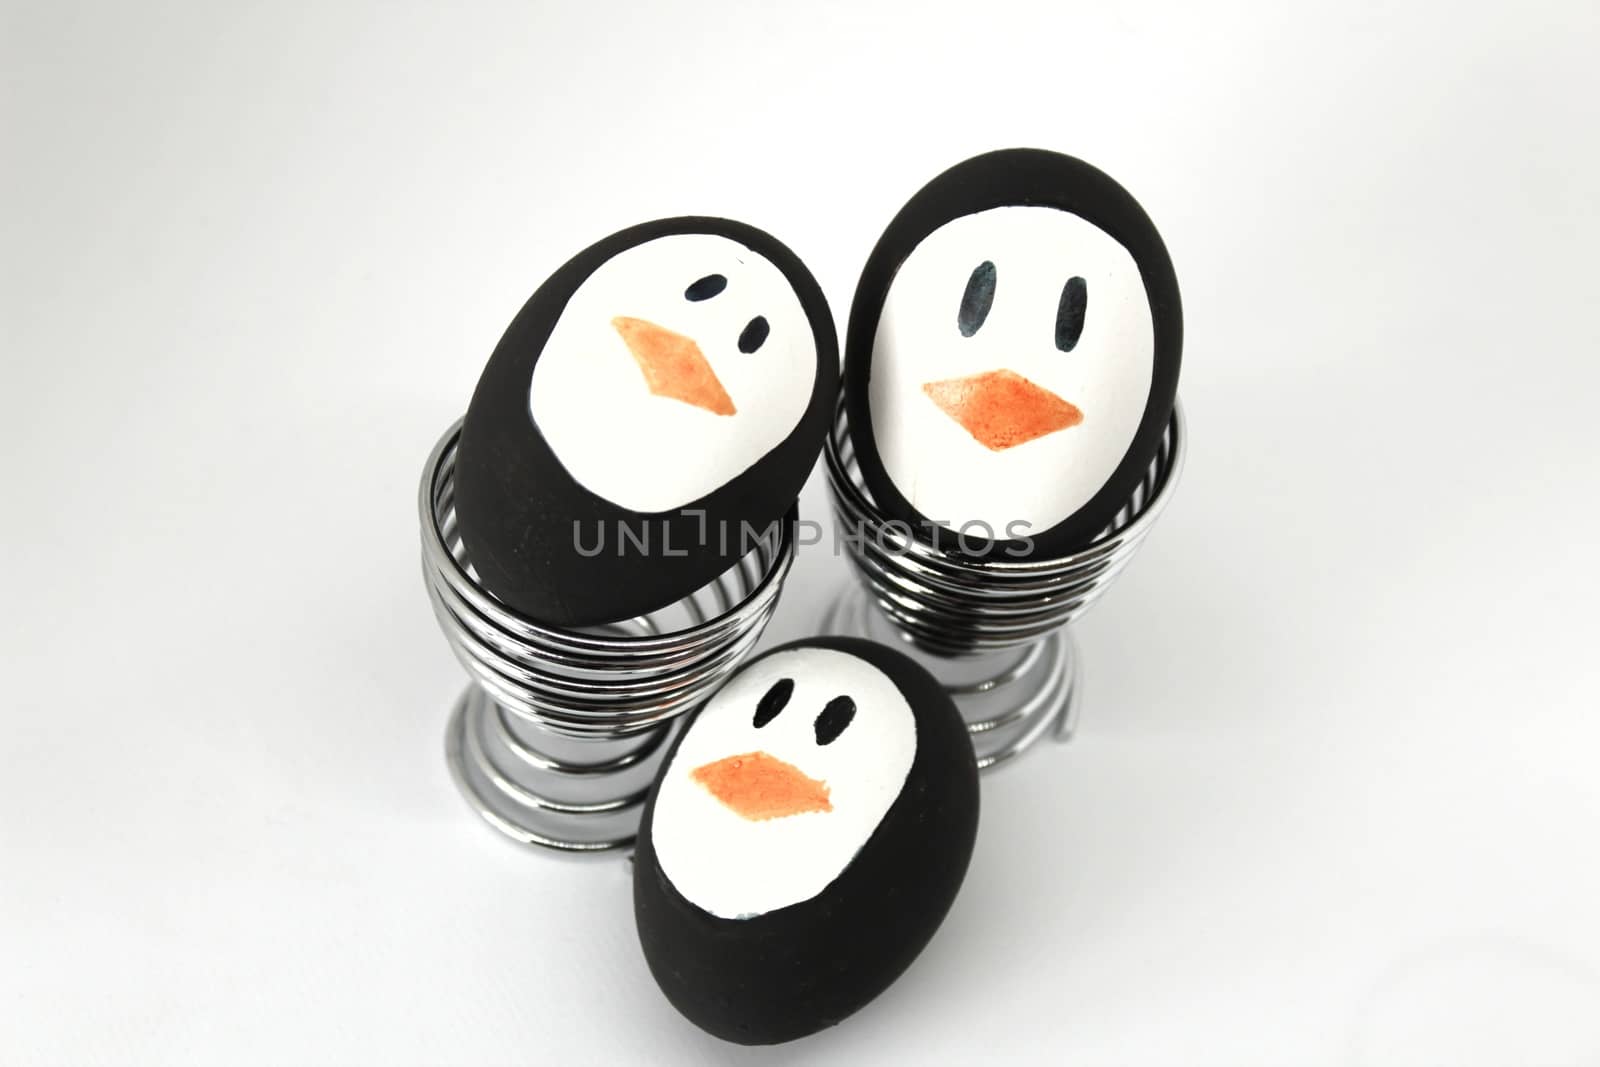 Penguin Easter Eggs on metal egg cup white background by soniabonet